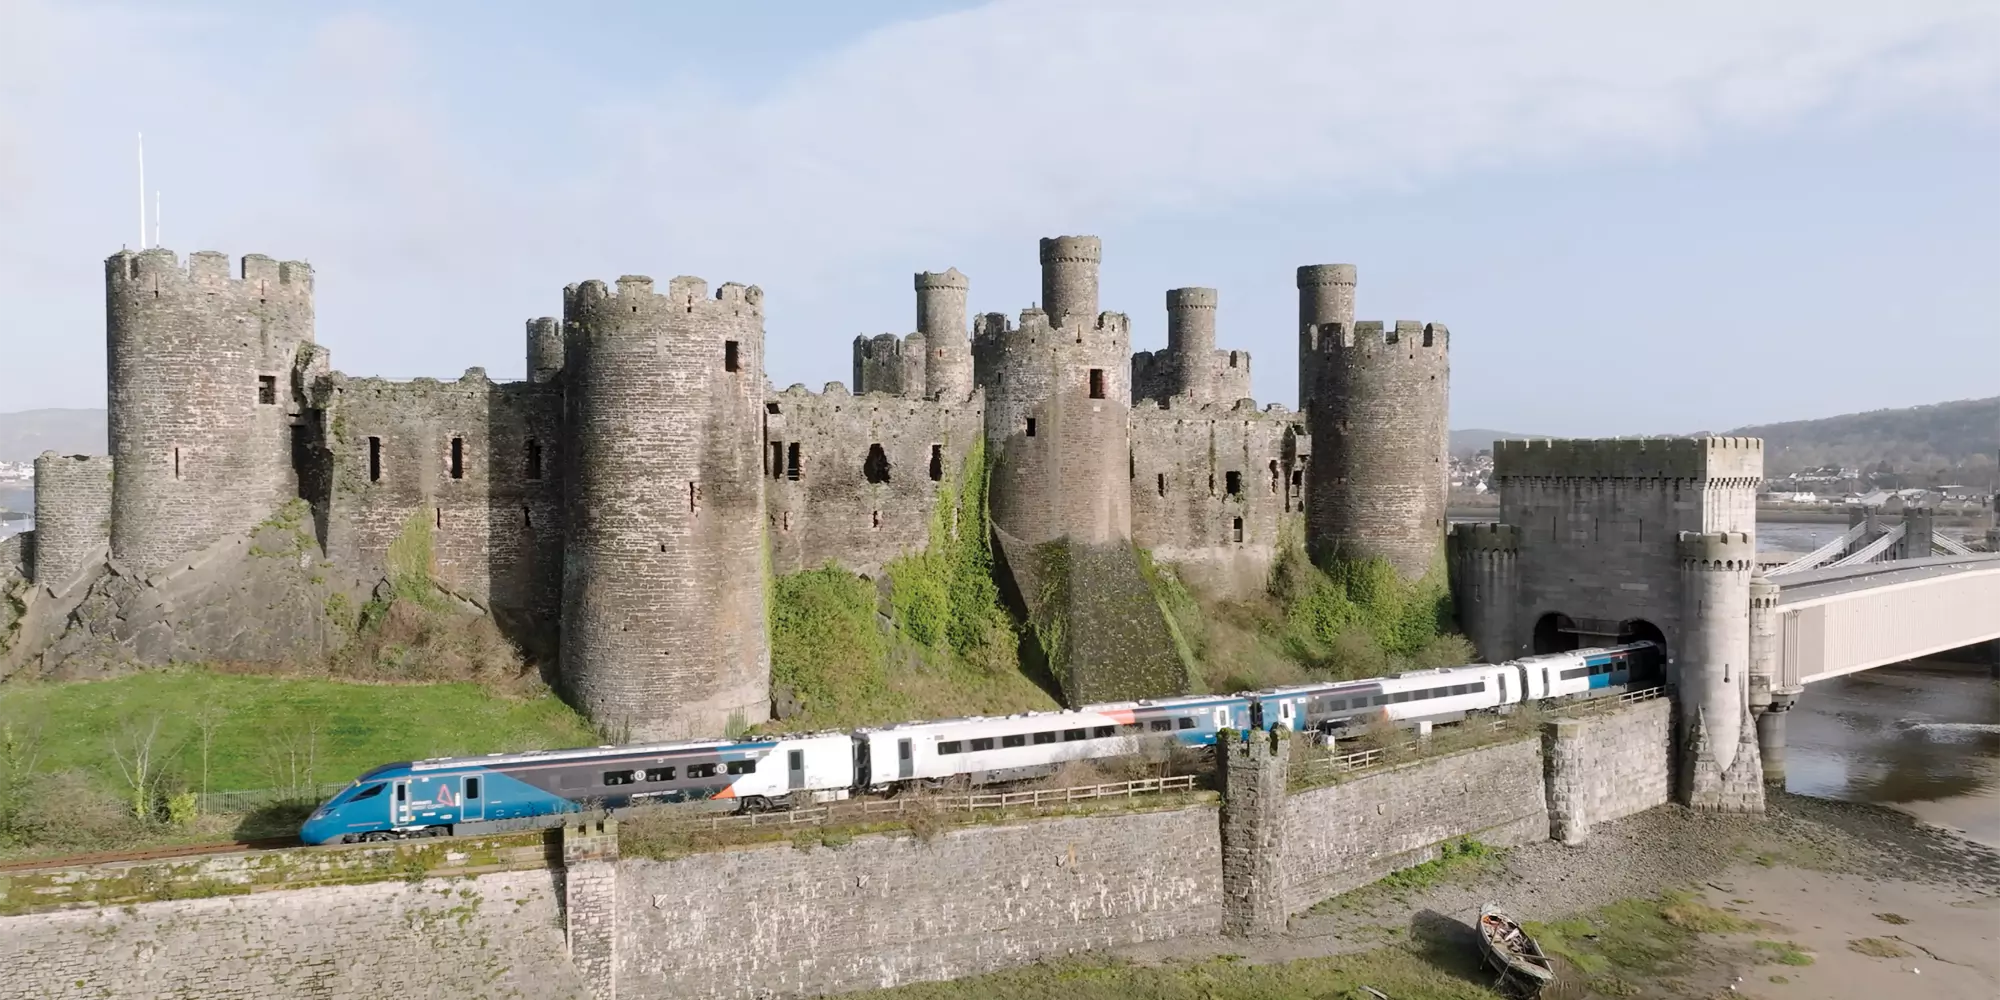 Conwy castle against a blue sky, the new Evero train speeds alongside it.